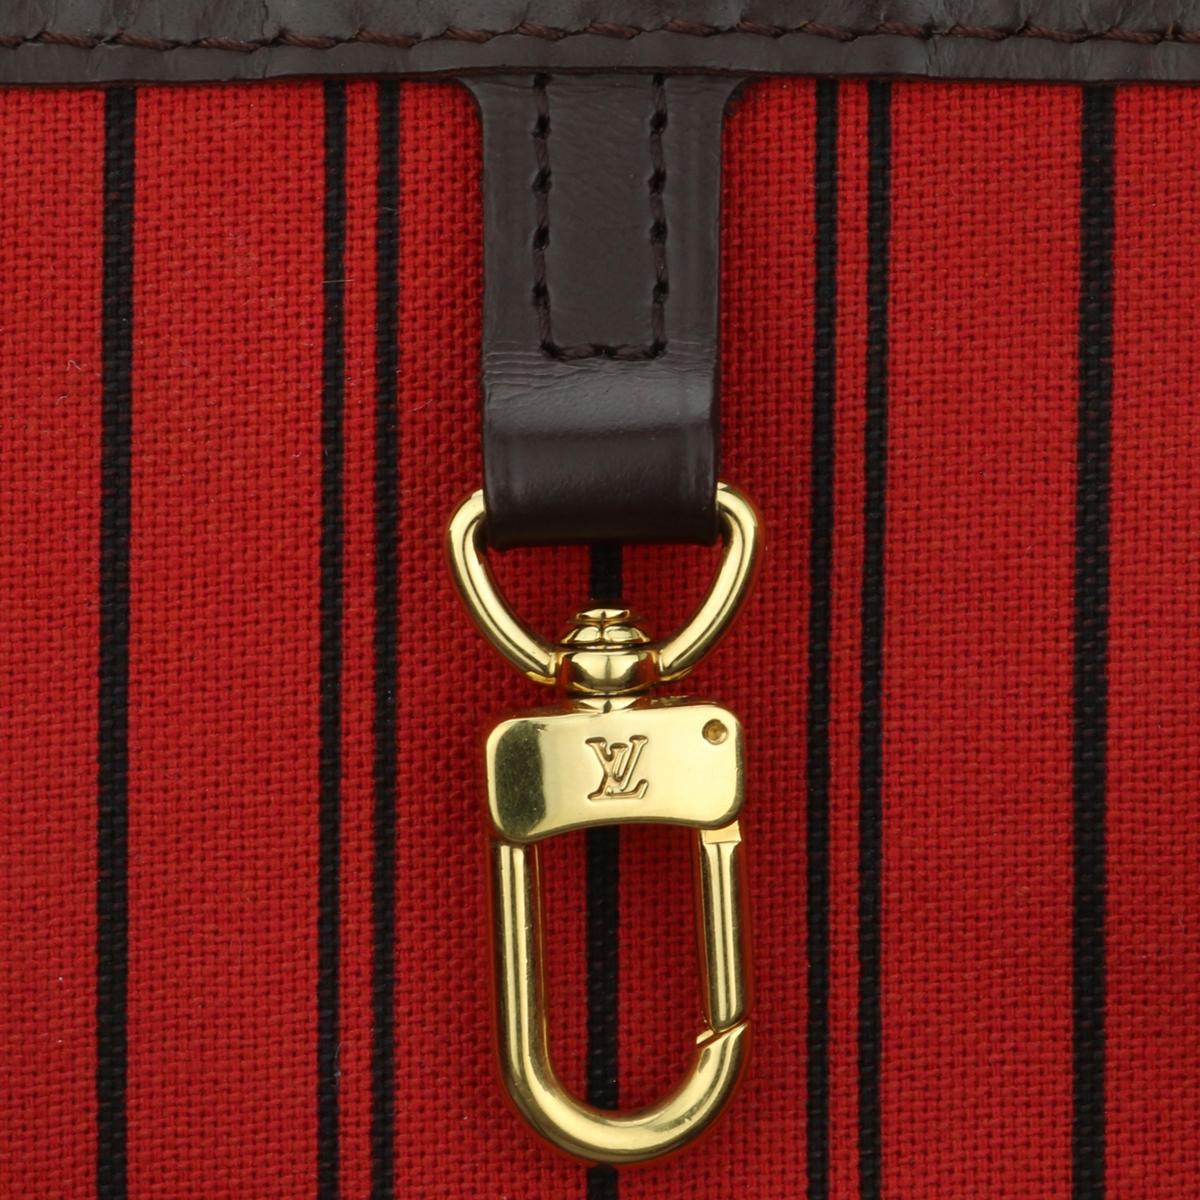 Louis Vuitton Neverfull GM Bag in Damier Ebène with Cherry Red Interior 2015 10